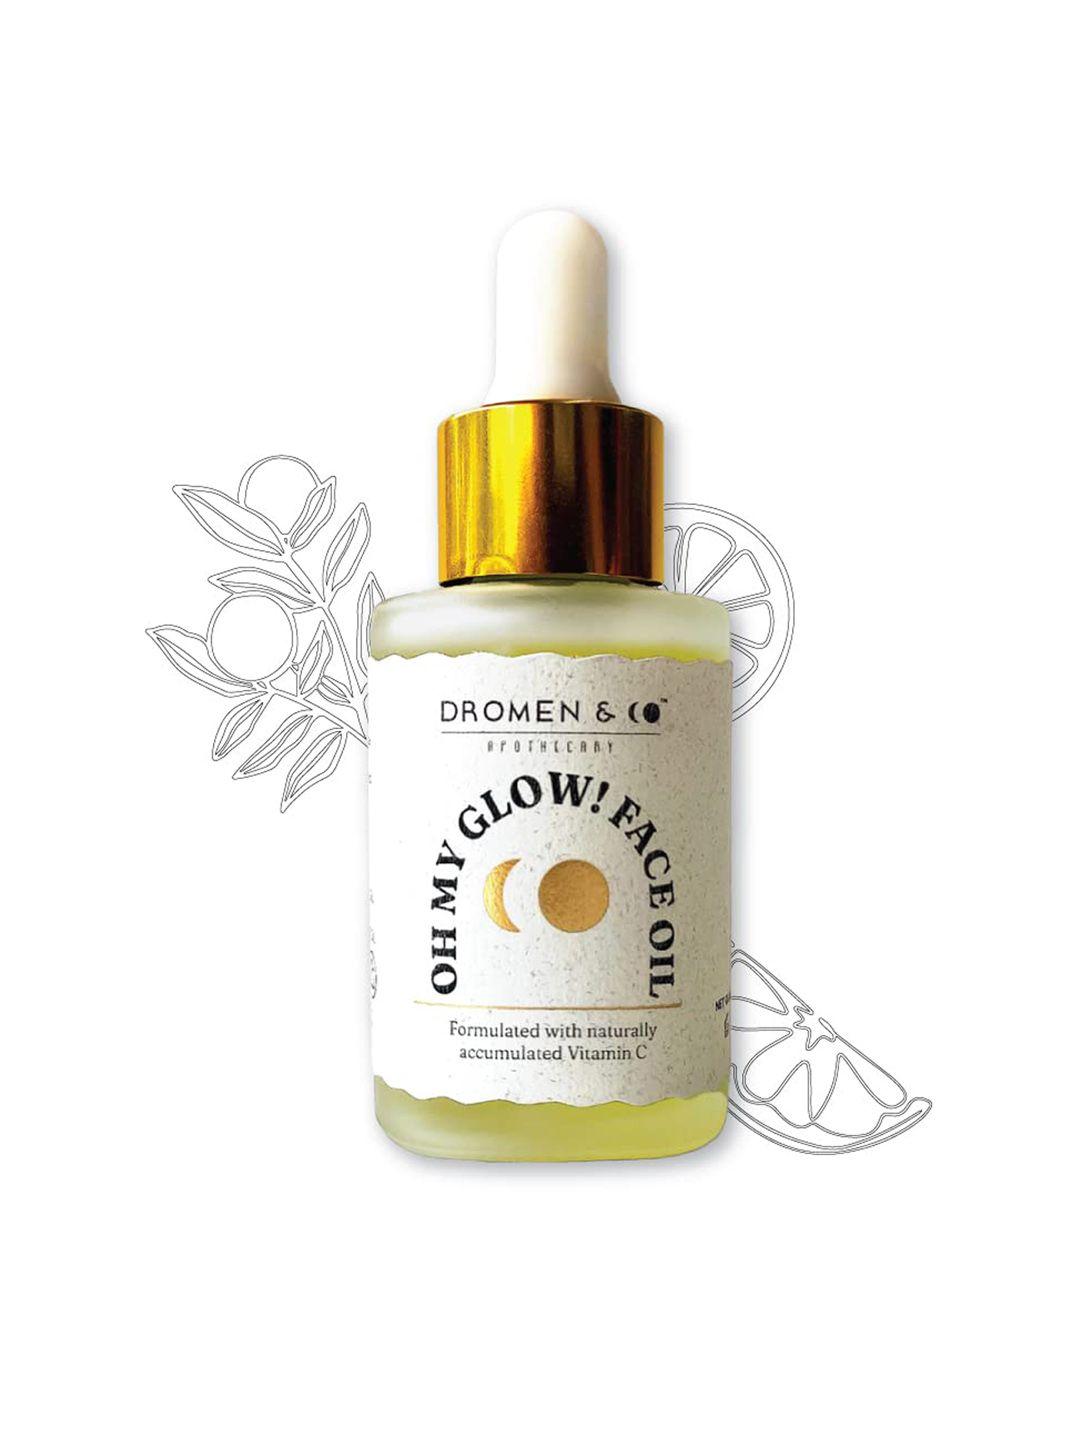 dromen & co oh my glow! face oil with vitamin c - 30ml